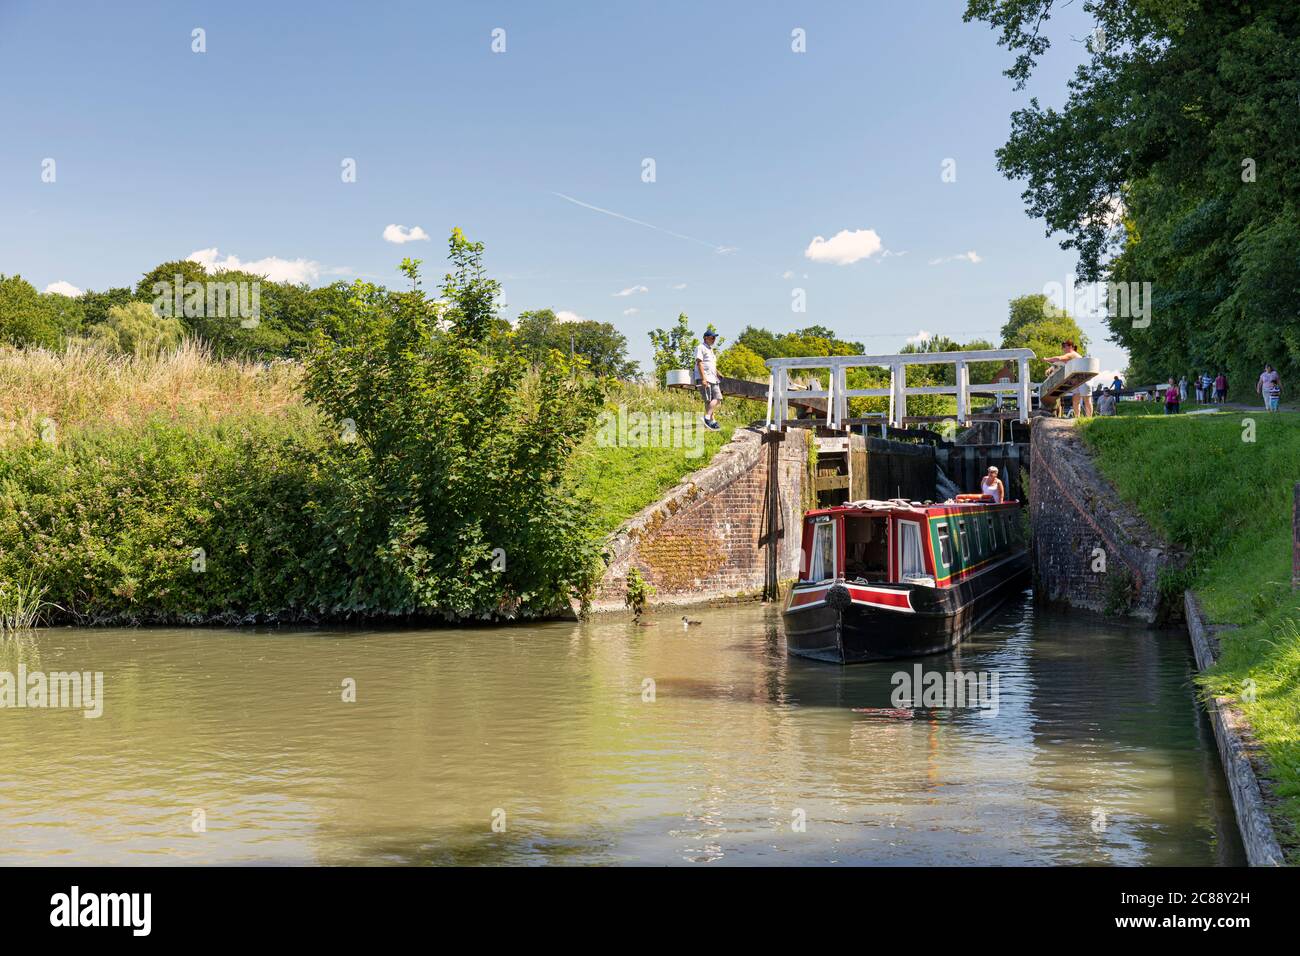 Lock gates opened to allow Canal Boat to continue on down the Caen Hill Locks, Kennet and Avon Canal, Devizes, Wiltshire, England, UK Stock Photo